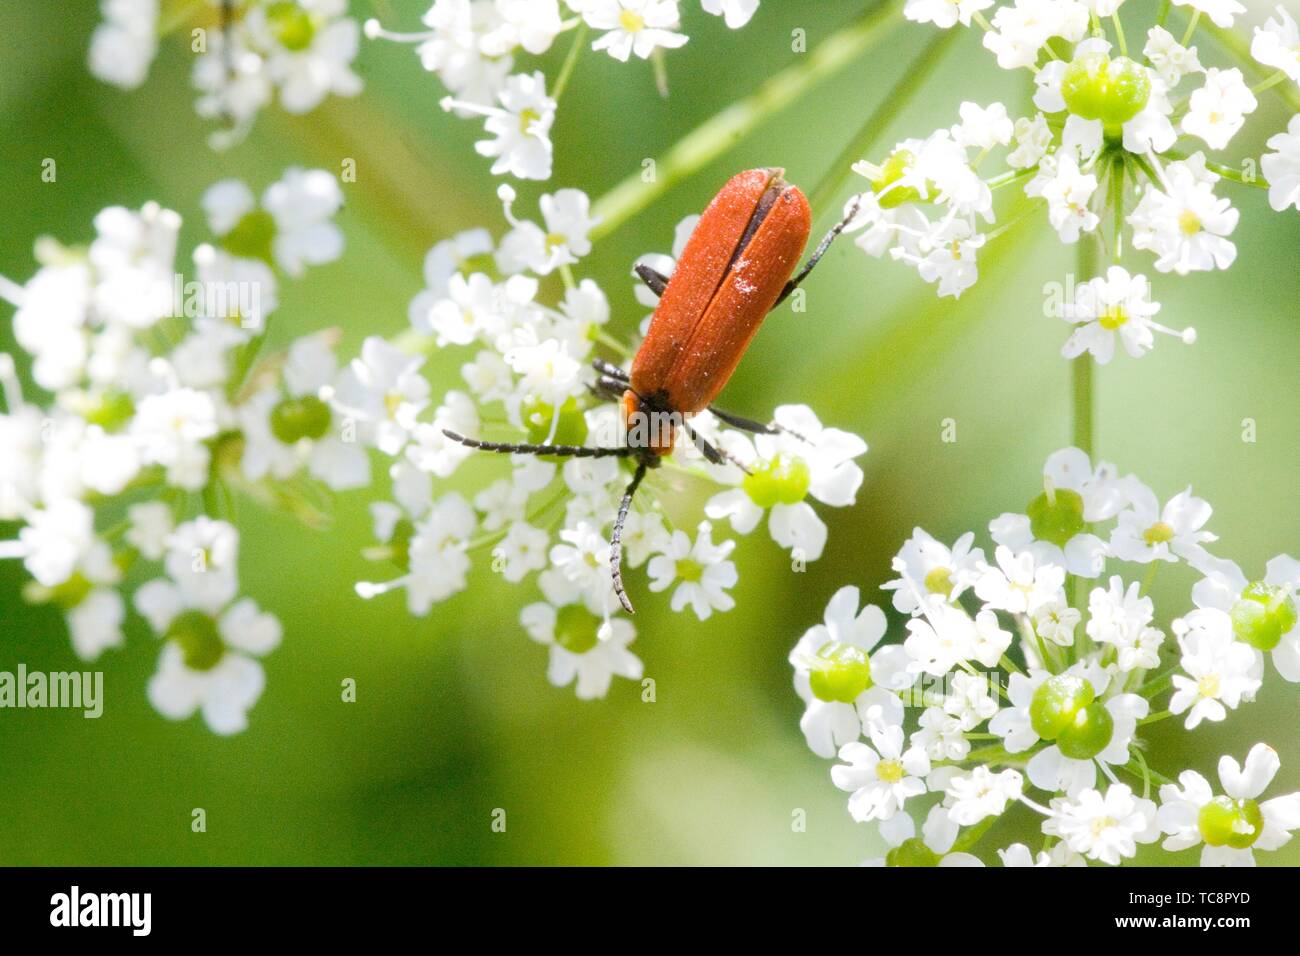 Net-winged Beetle, Lygistopterus sanguineus. Crimson elongated beetle that looks similar to a soldier beetle, but belongs to Lycidae. Elytra are Stock Photo